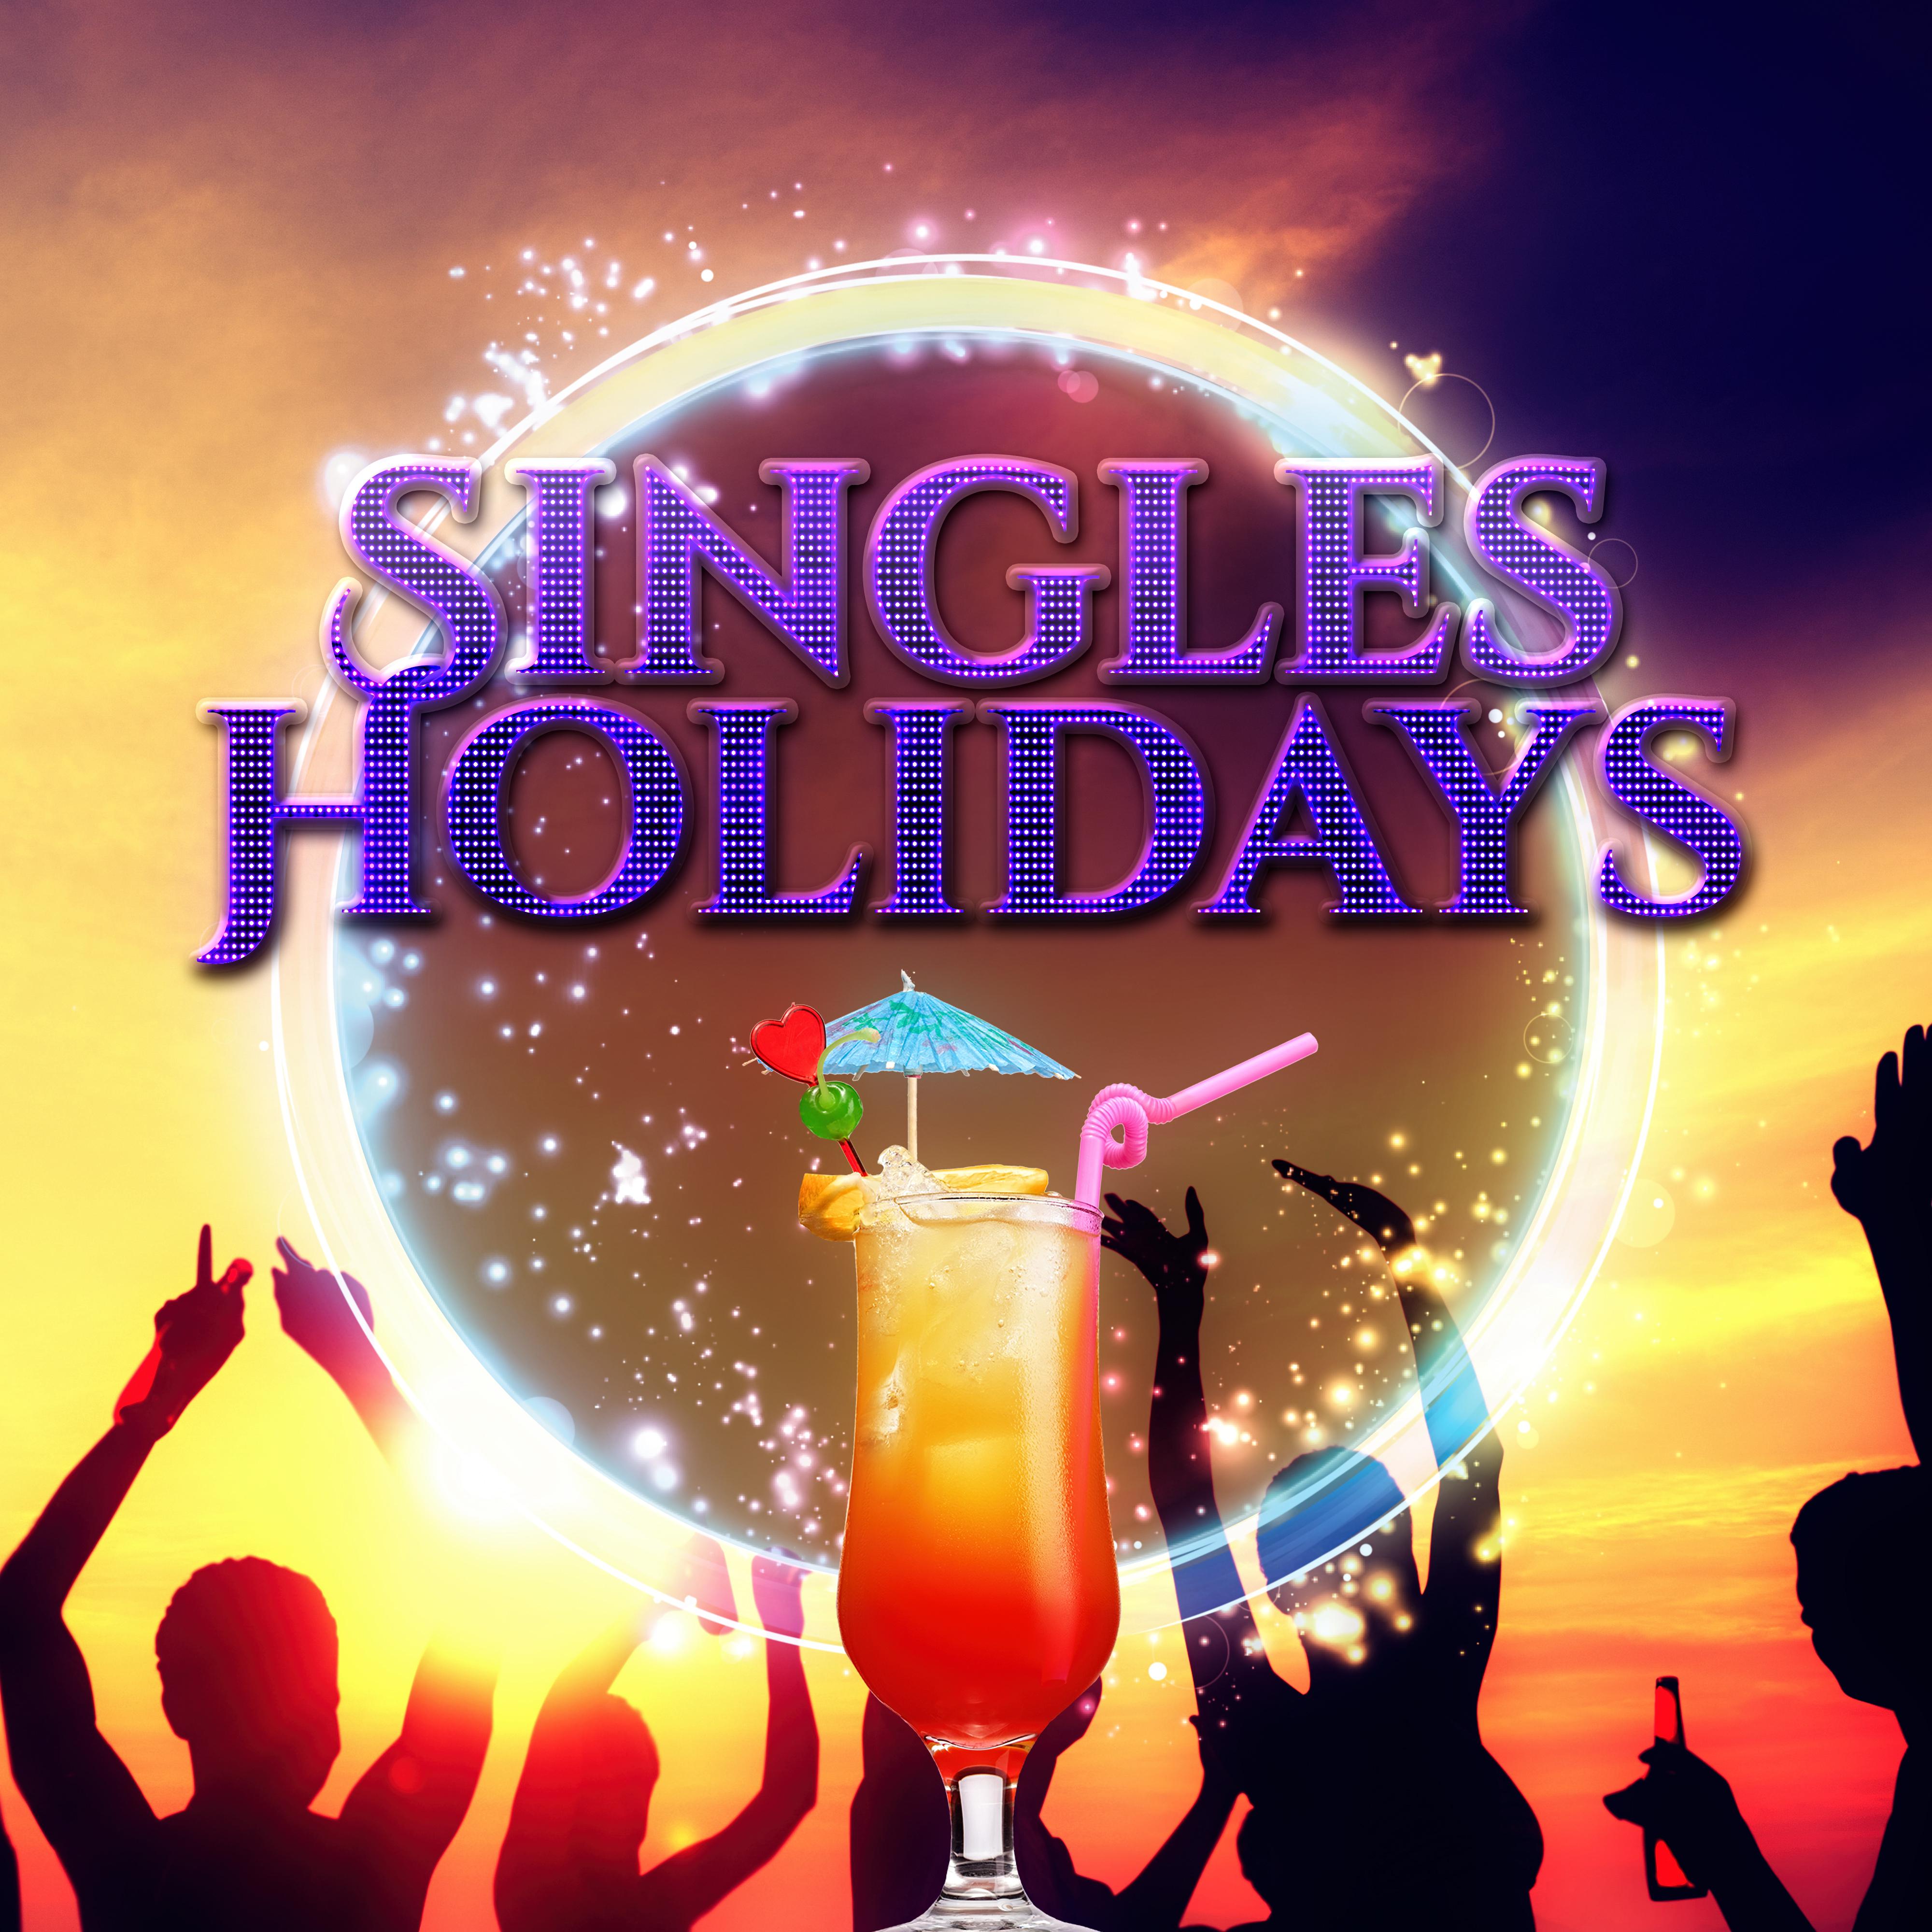 Singles Holidays - Fall in Love on Vacation, First Time, Passionate Eroticism,  Bikini on the Beach, Relaxing ***, Vibration and Hot Rhythms, Send a Kiss